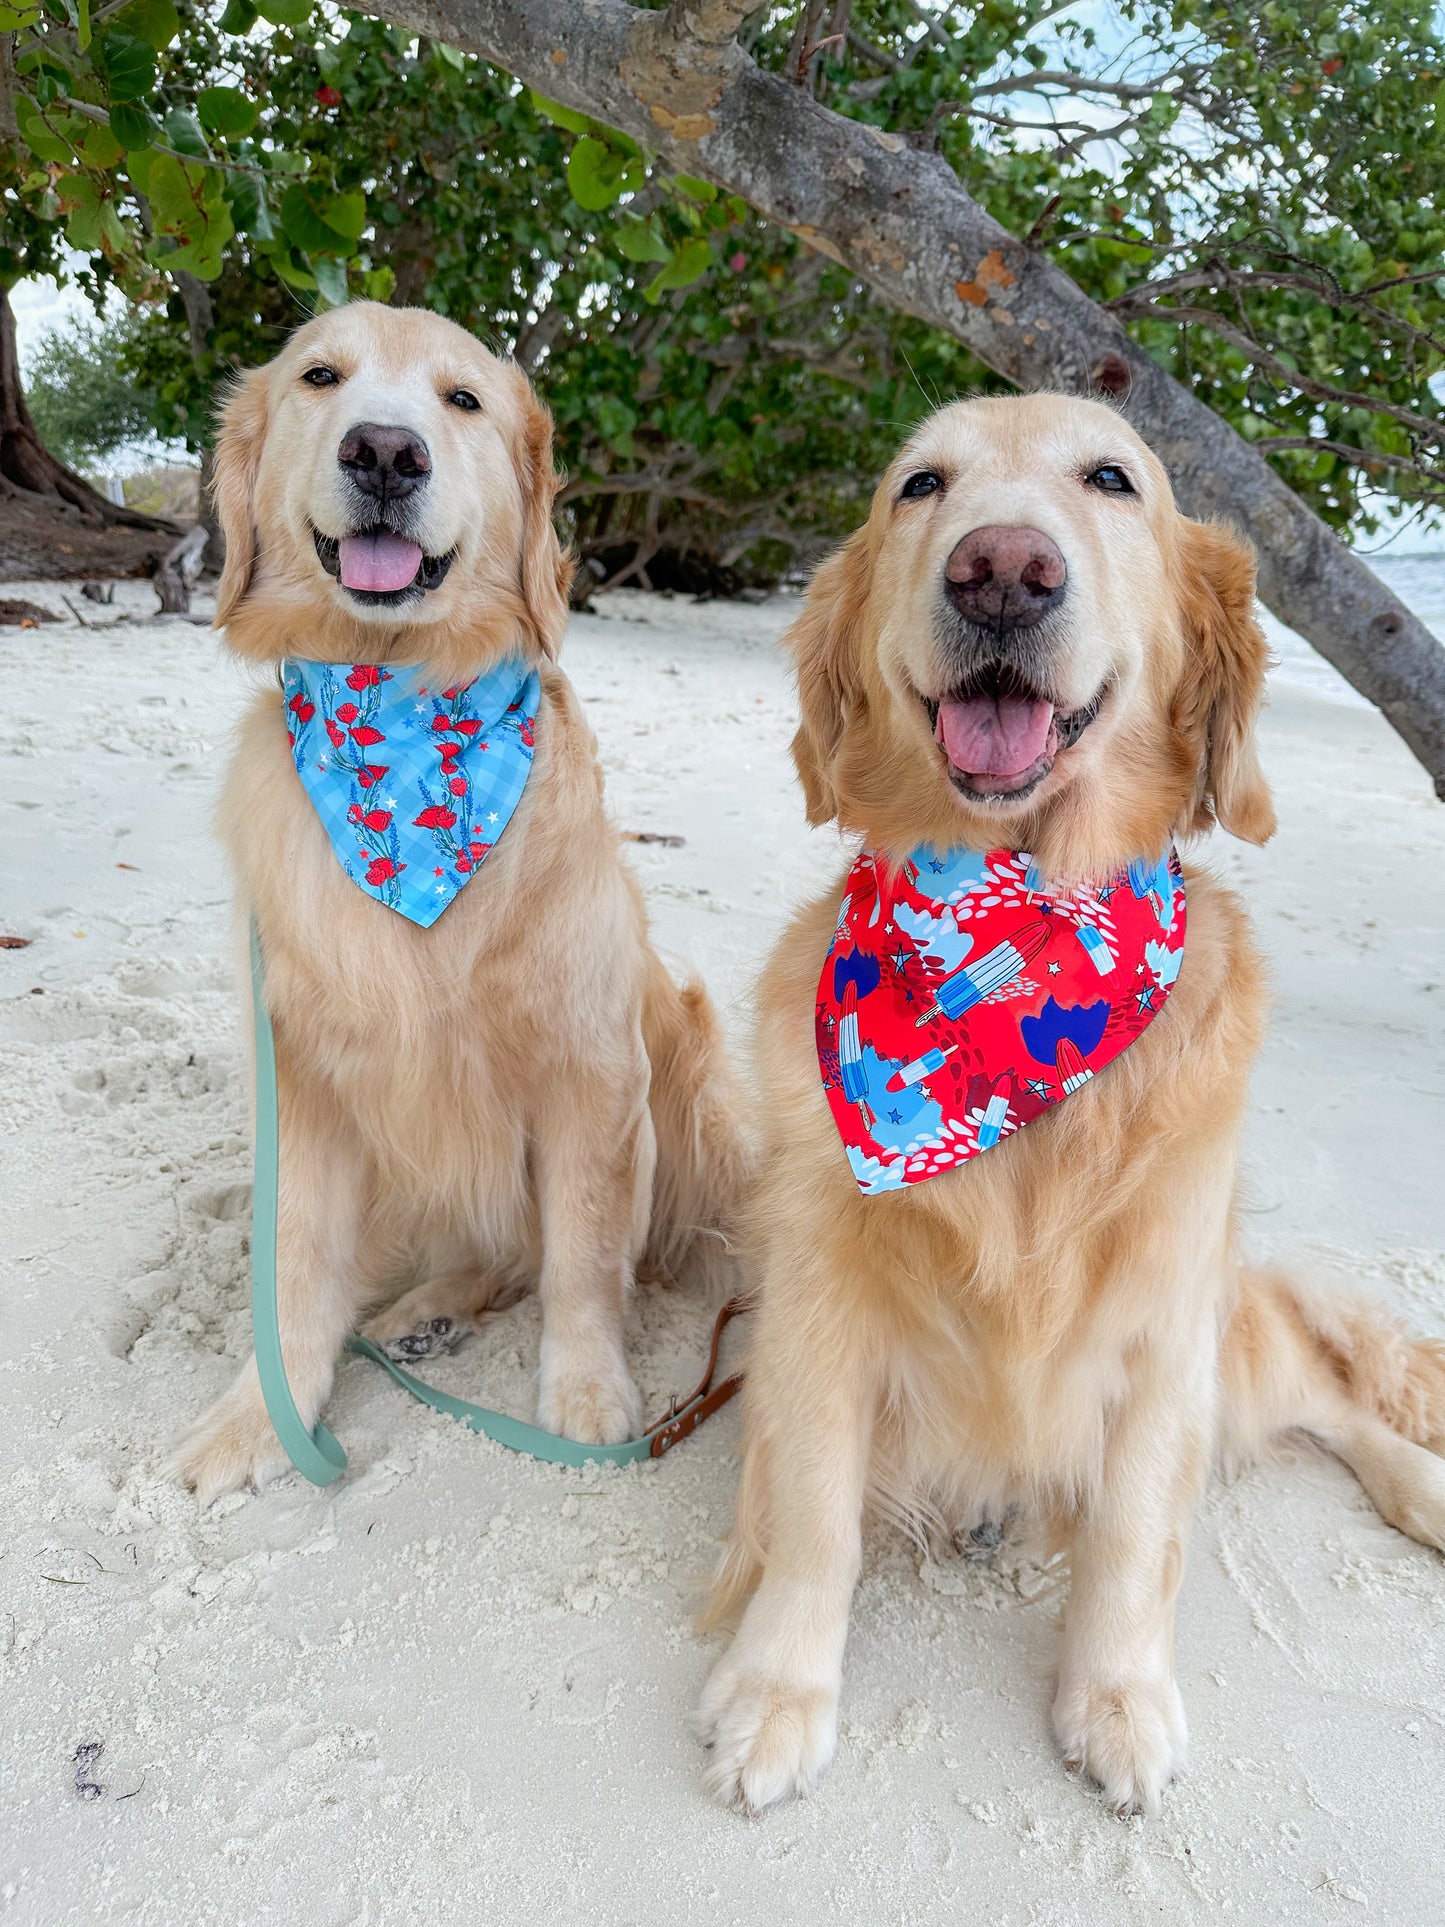 Red, White, and Blue-tiful Poppies Bandana